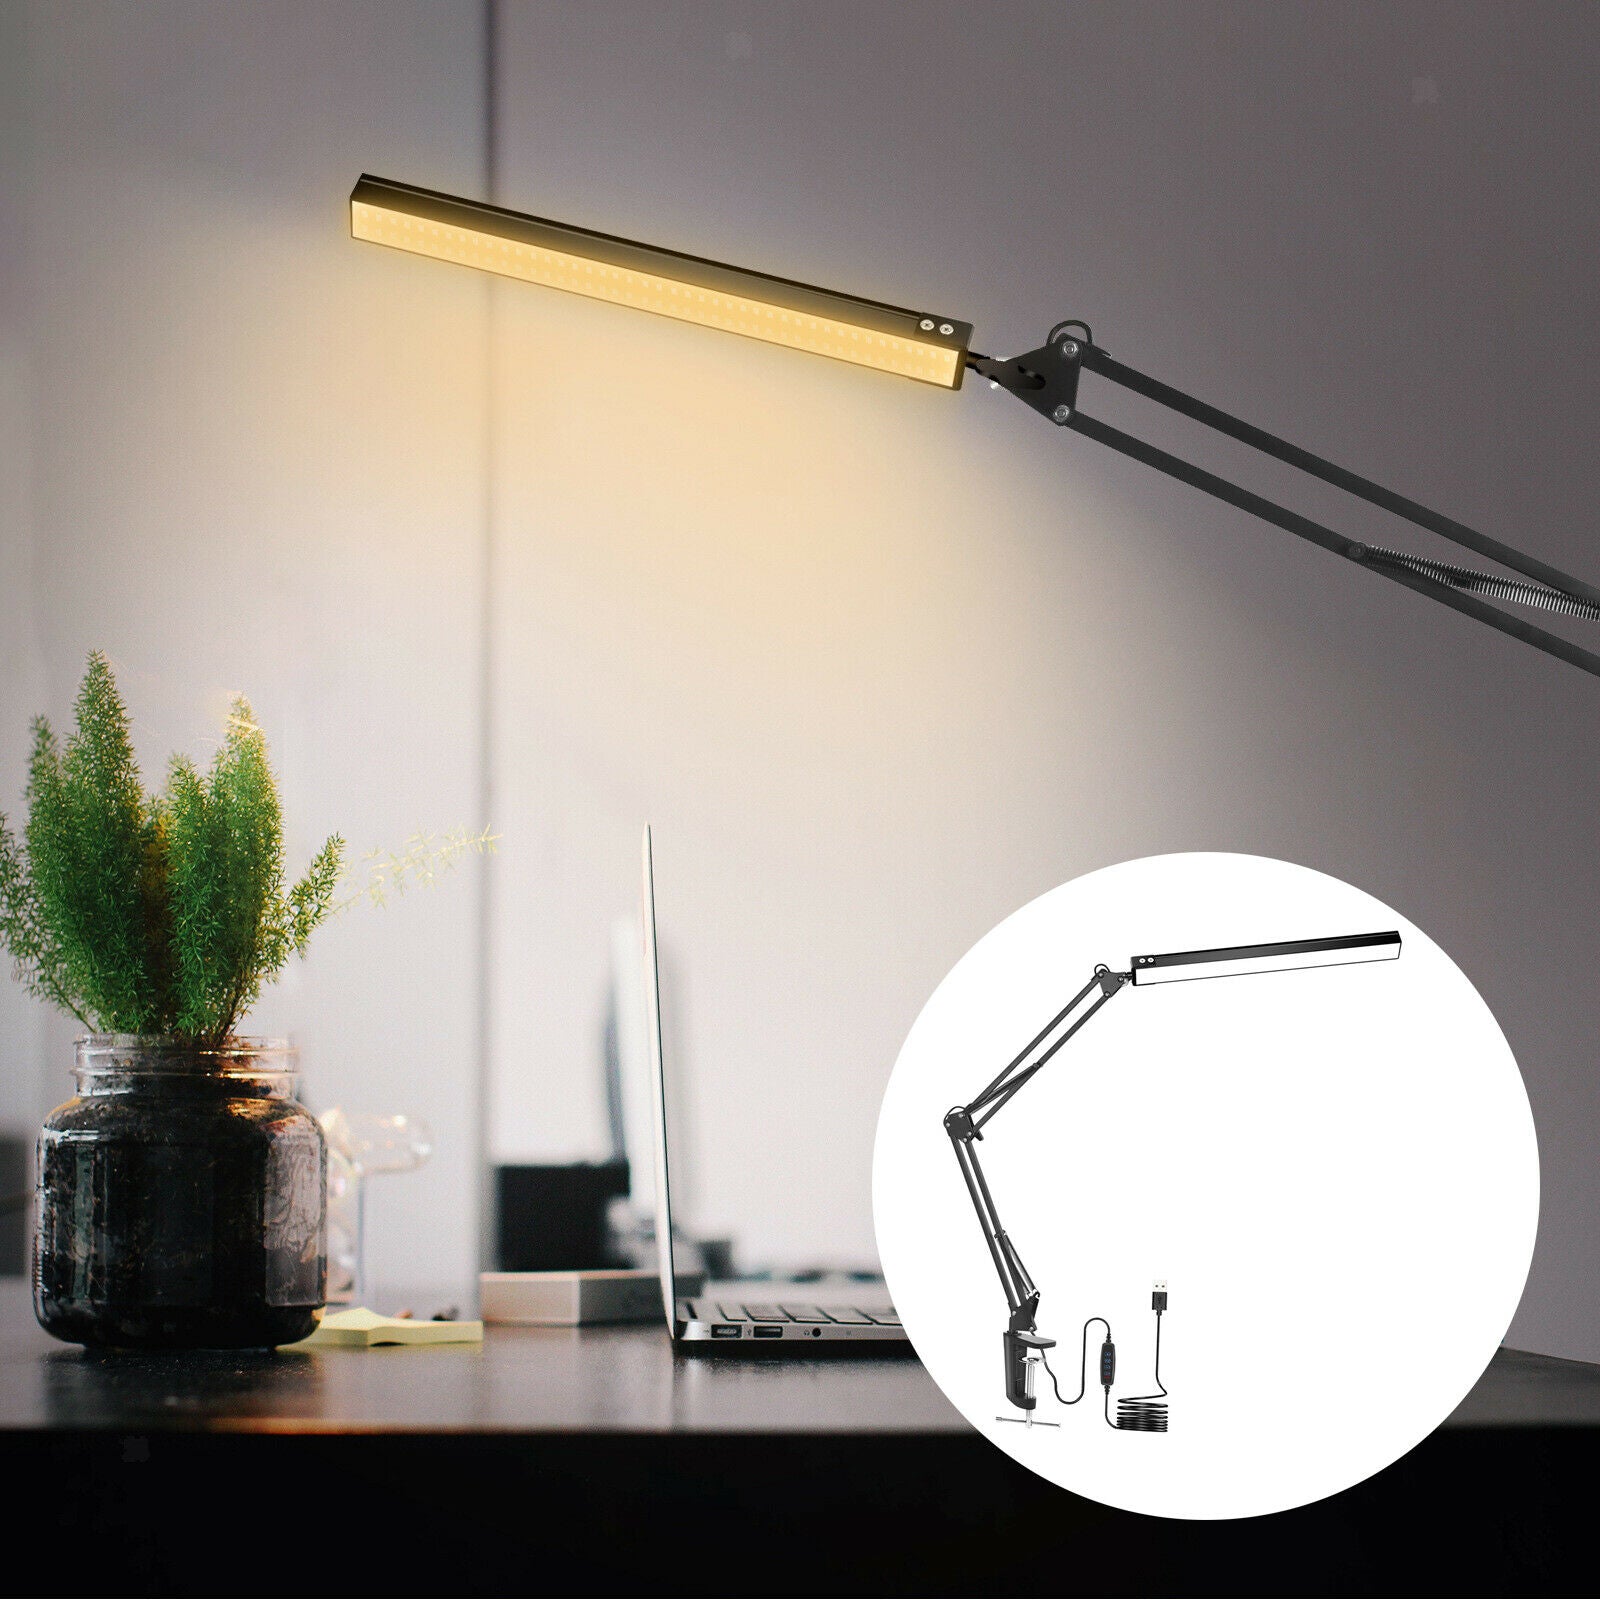 Swing Arm LED Desk Lamp with Clamp, Dimming Adjustable Architect Work Light